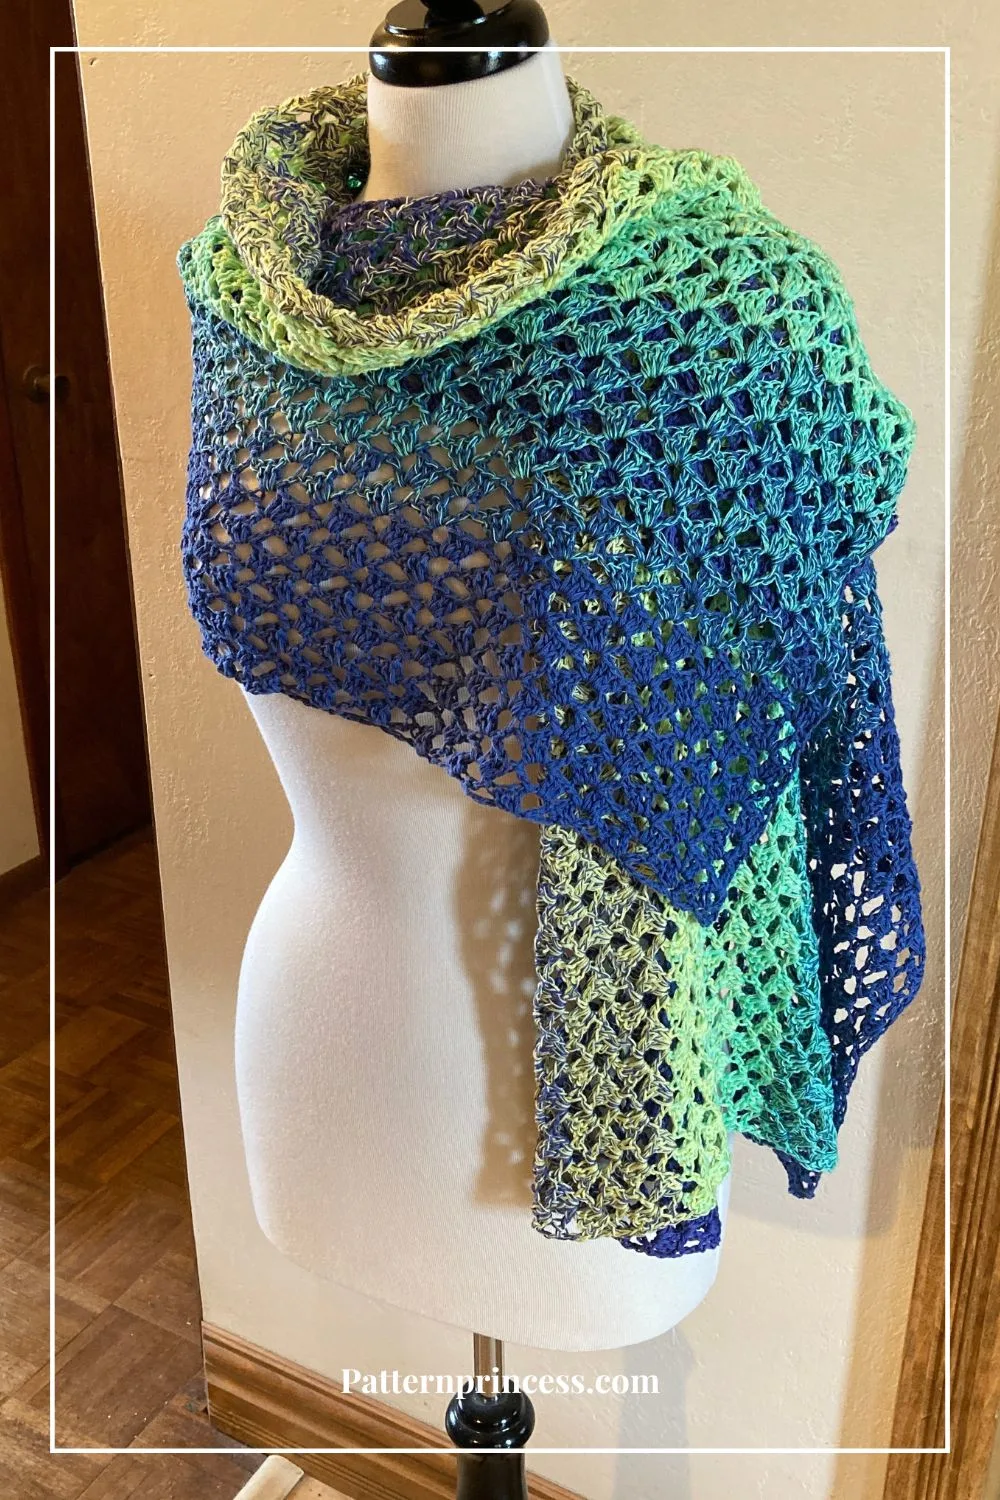 Rectangular Lacy Shawl Wrapped Over Shoulders